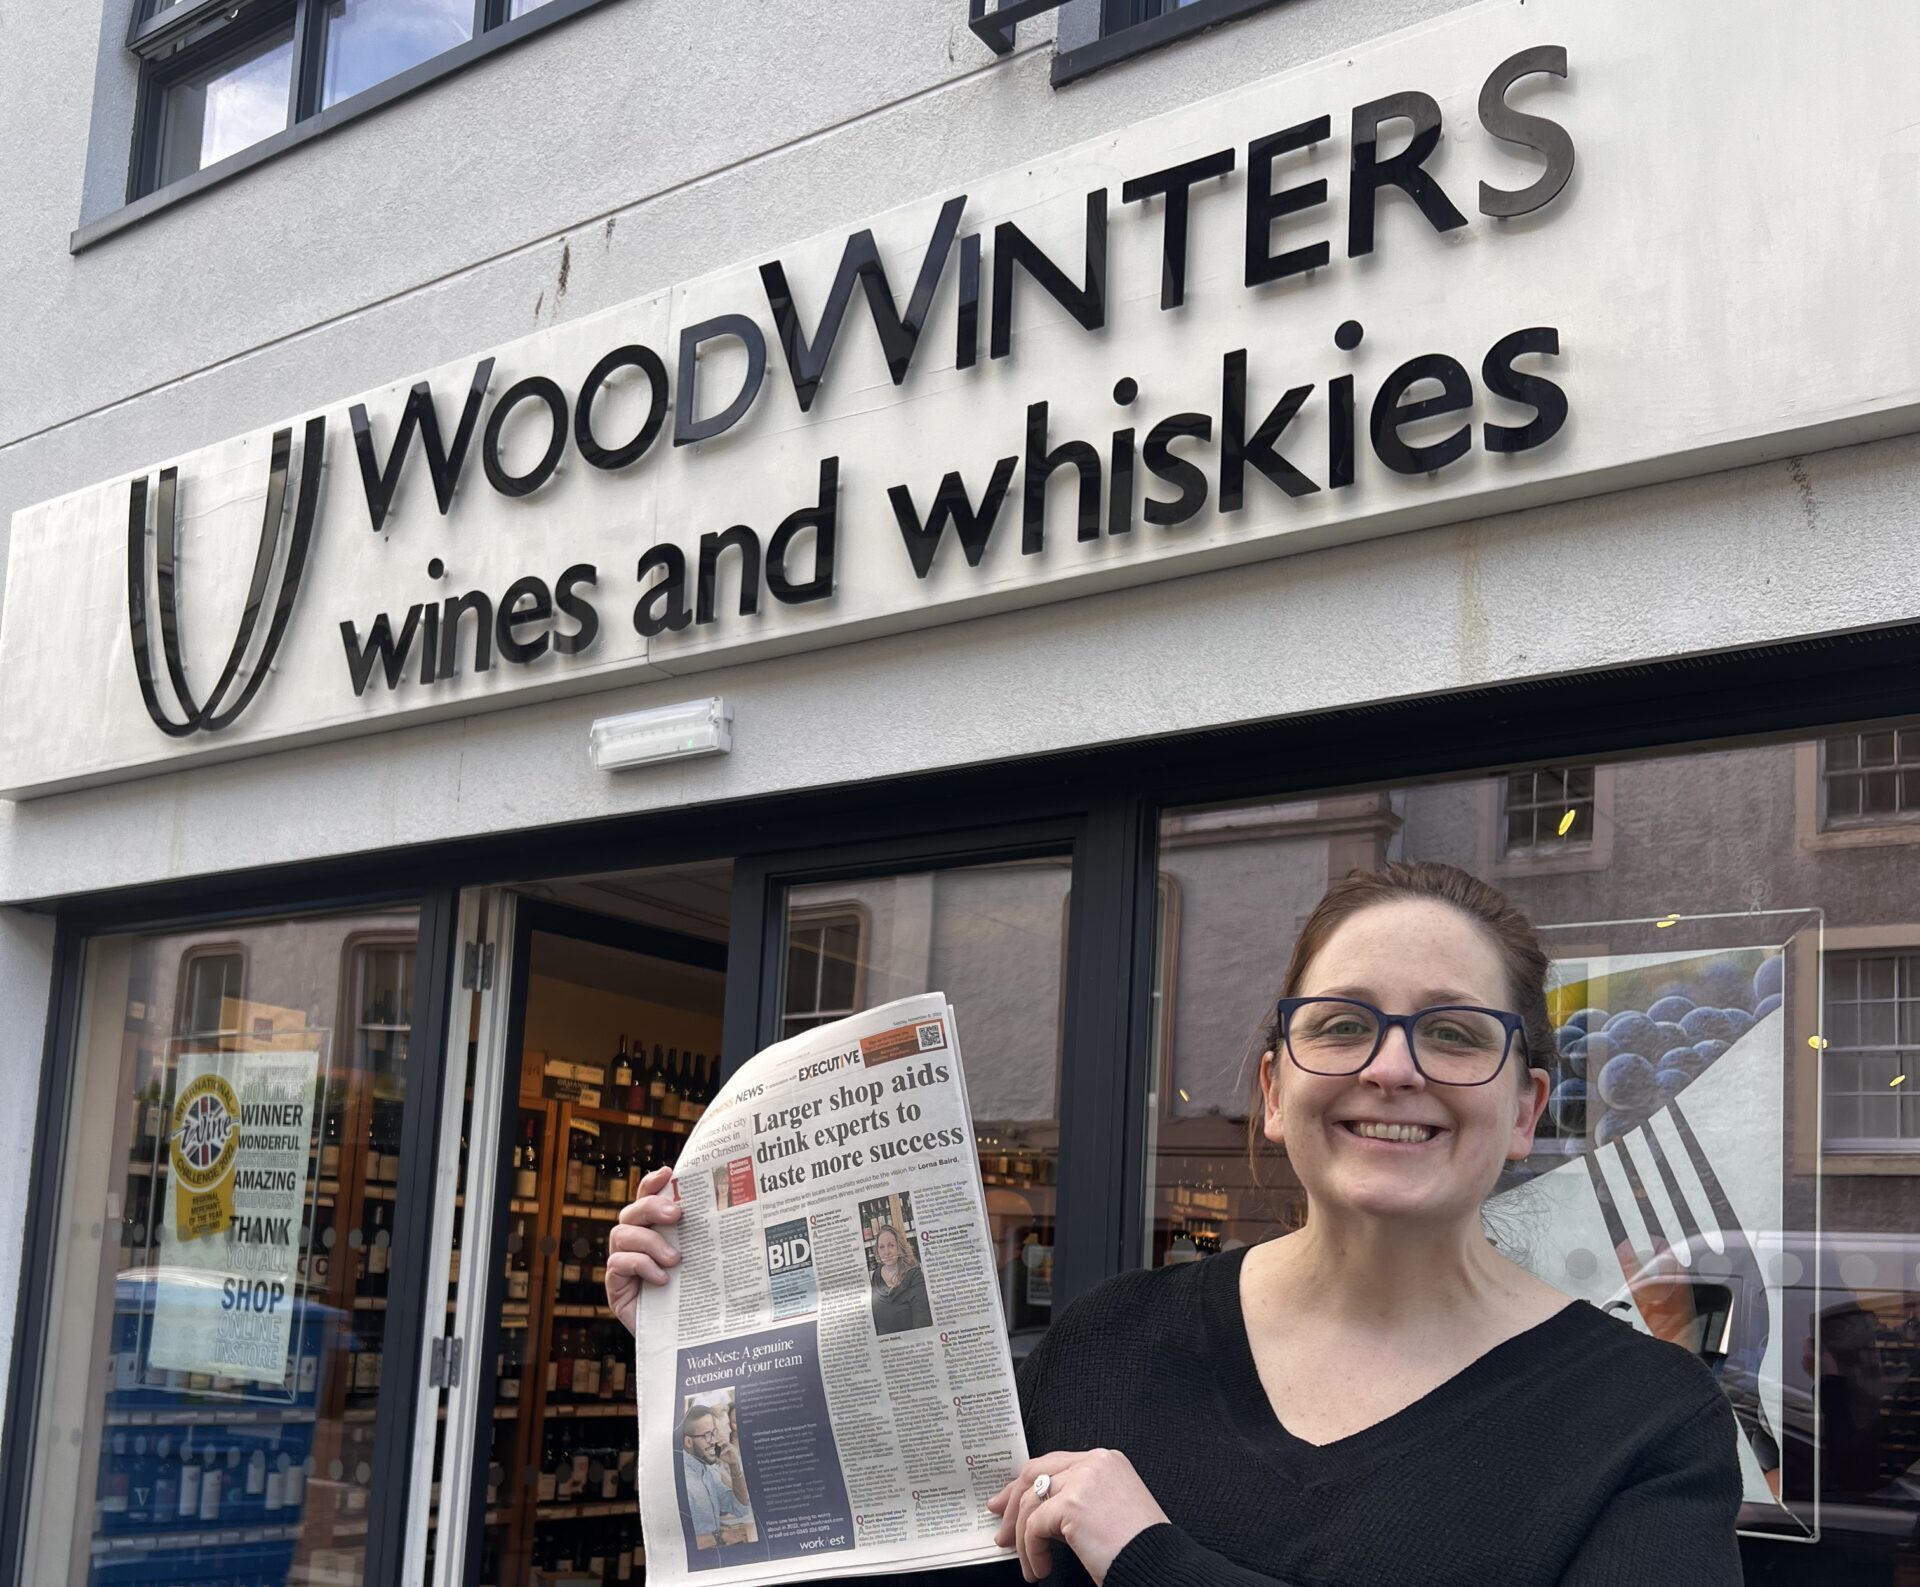 Successful Small Business Focus – WoodWinters on Church Street